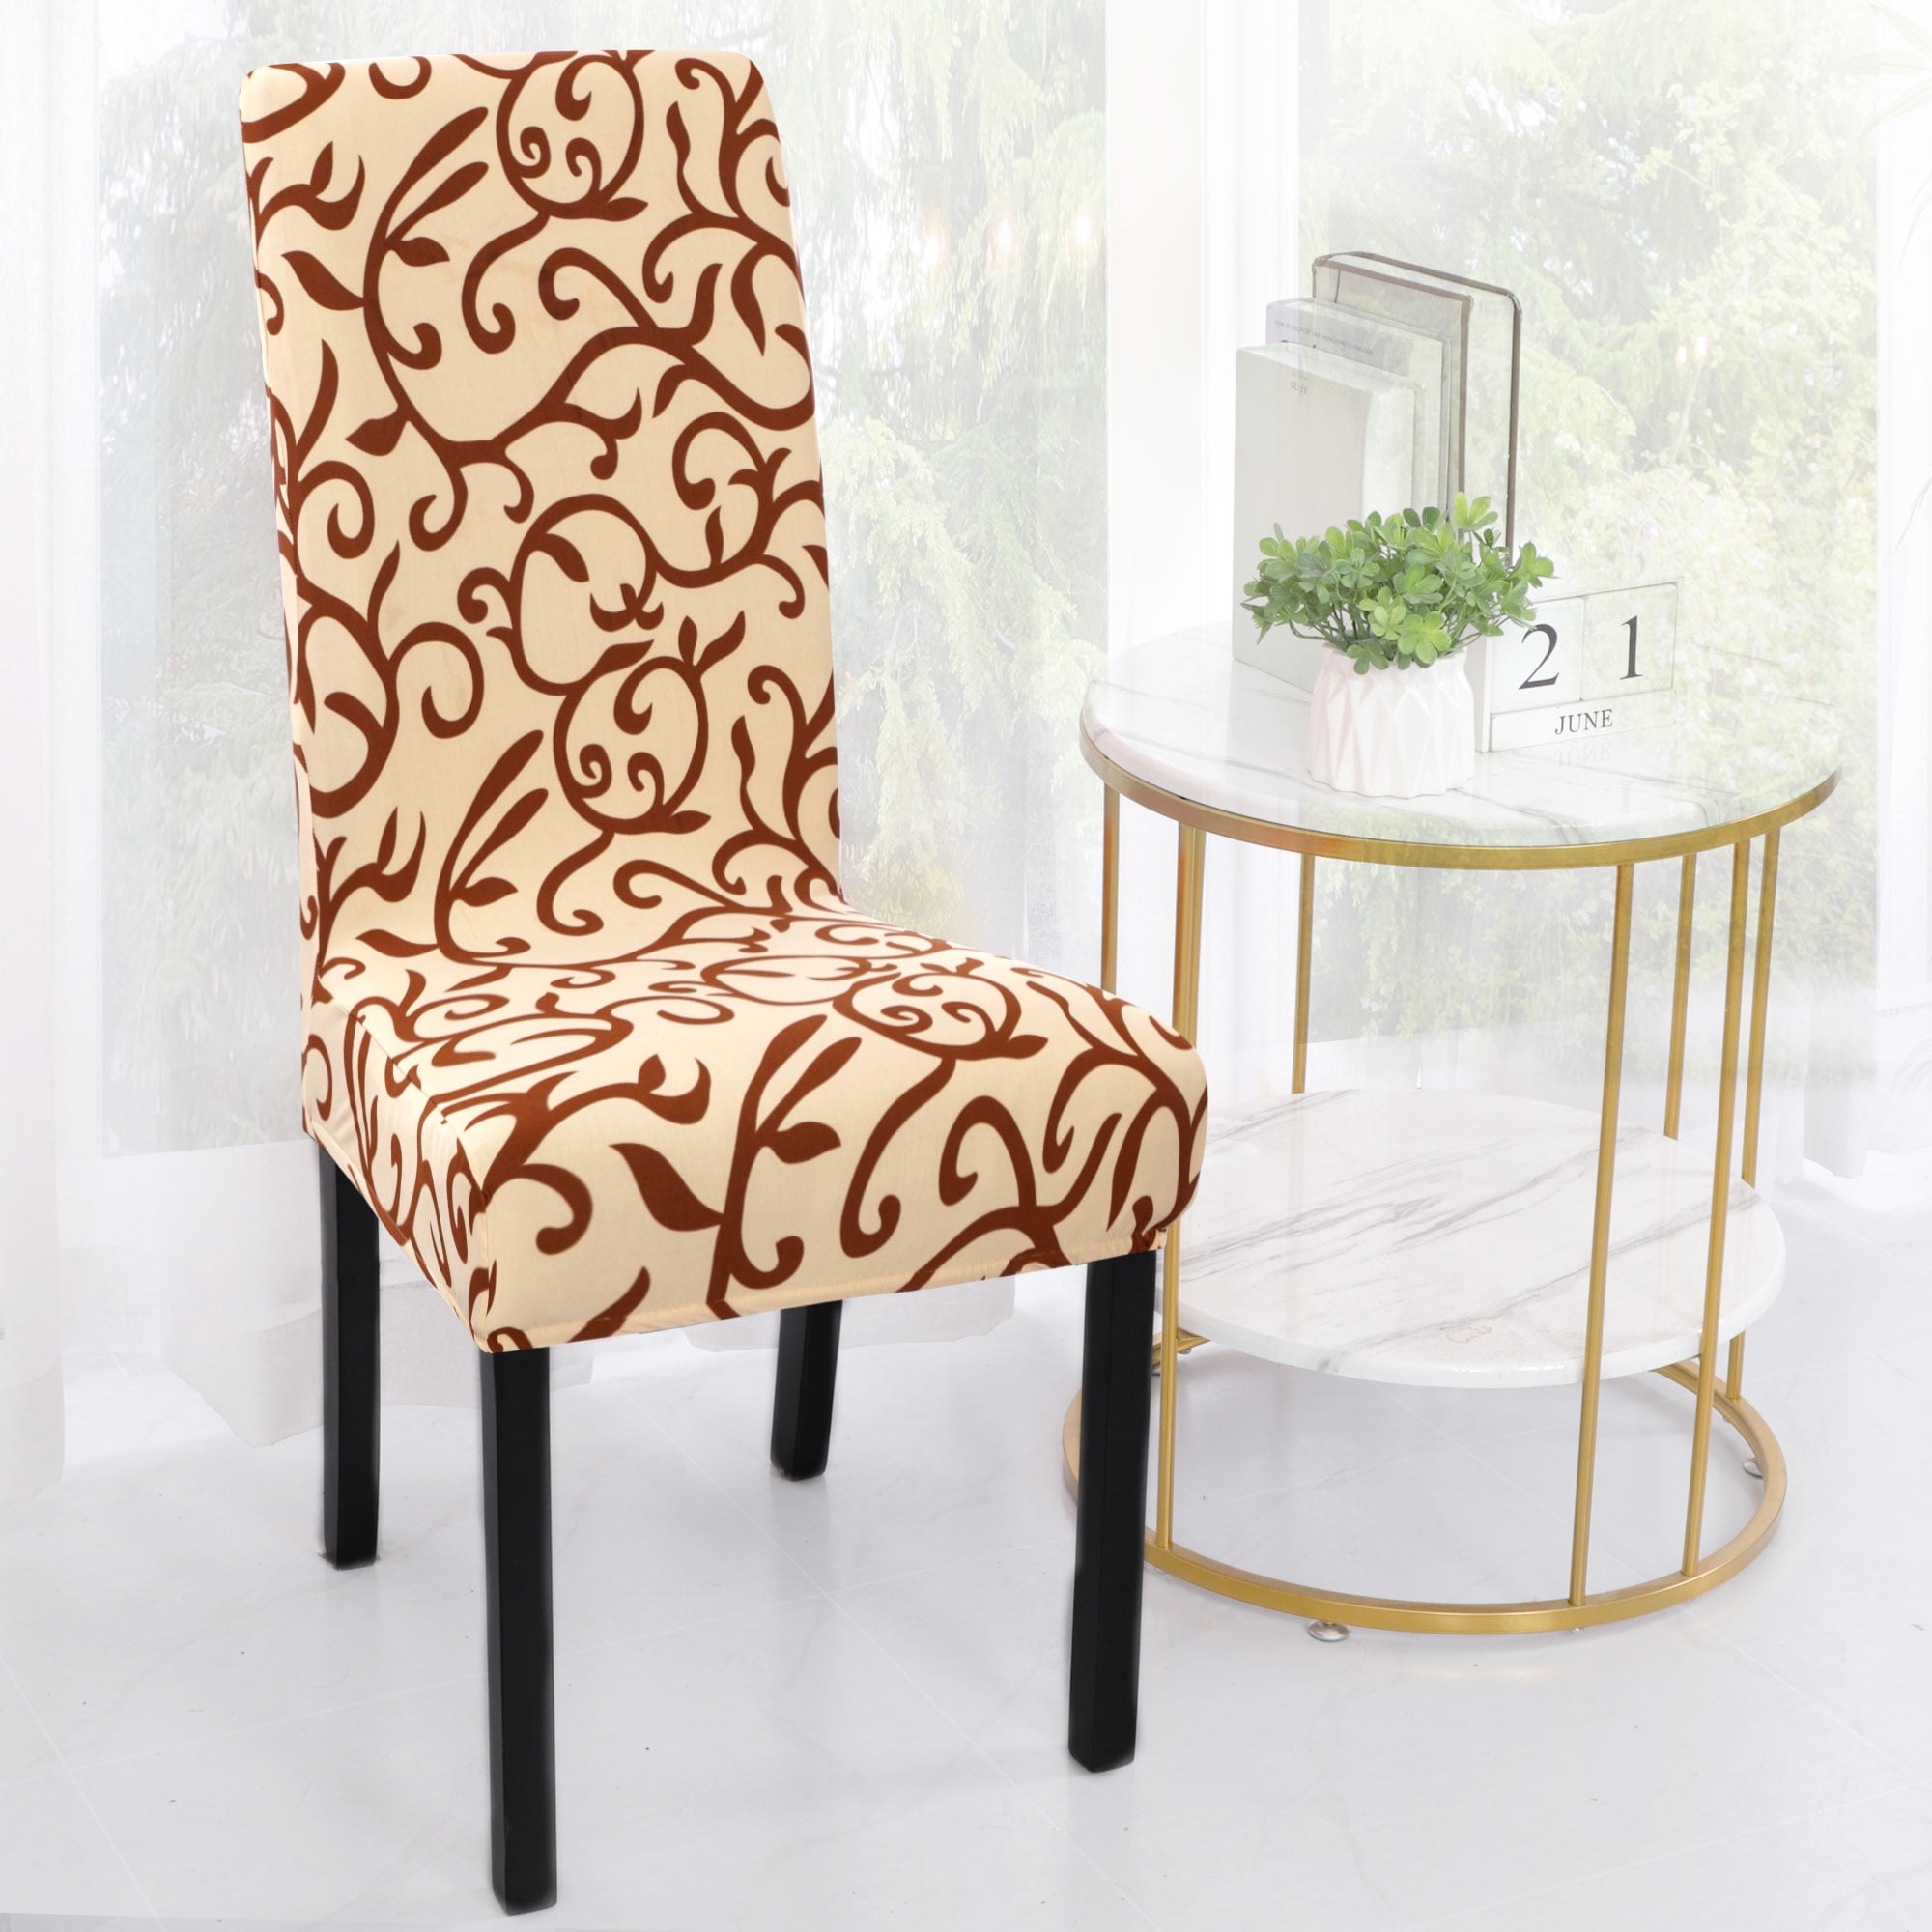 4PCS Dining Chair Cover Stretch Jacquard Polyester Spandex Fabric Dining Chair Covers Removable Washable Chair Slipcovers Pack of 4, Beige 